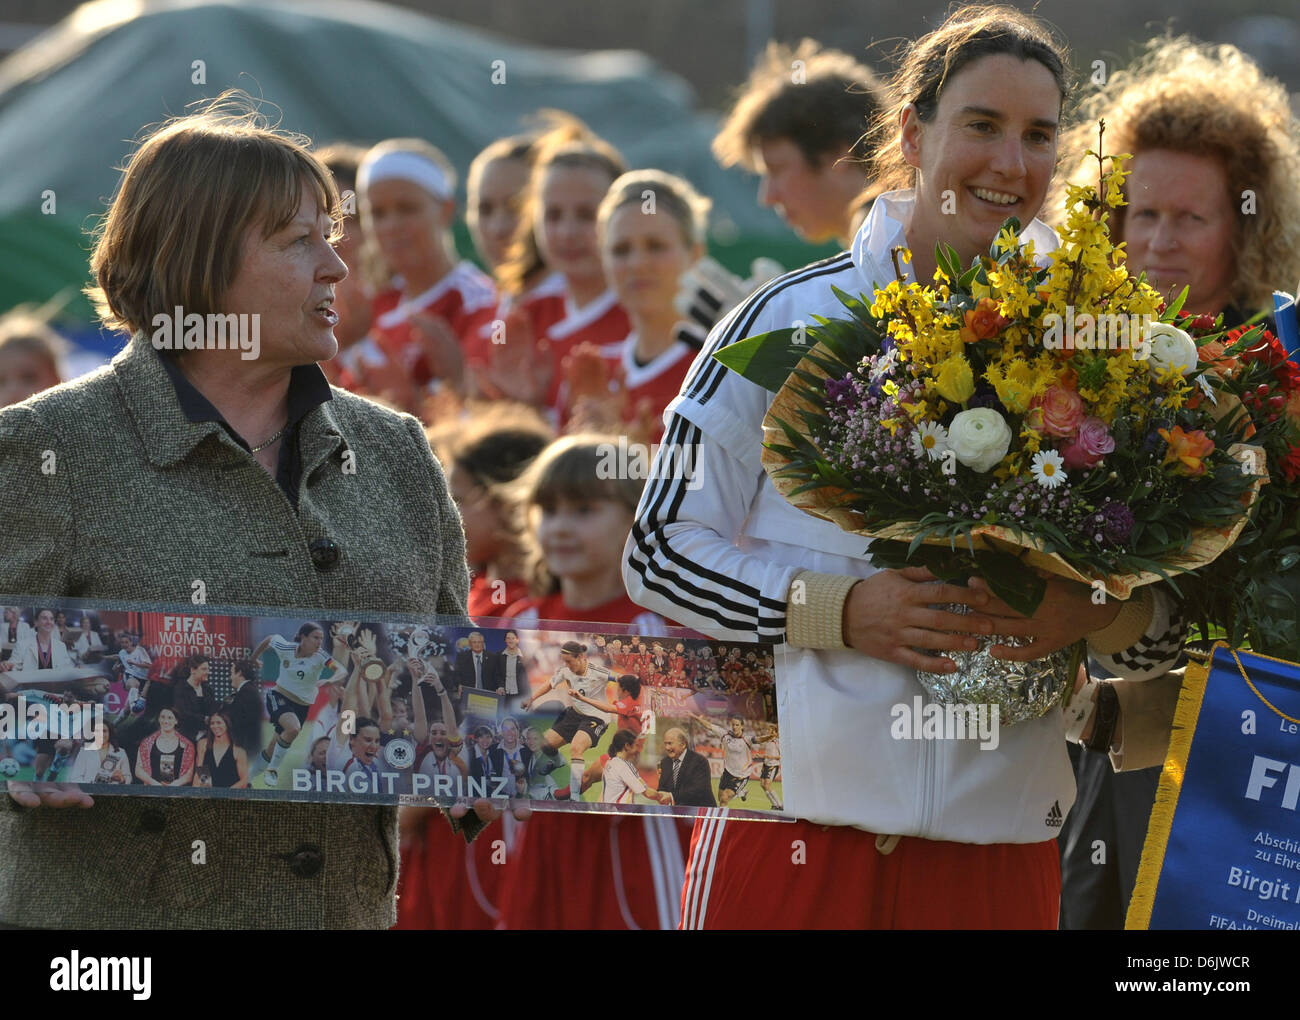 DFB record national soccer team player Birgit Prinz holds flowers next to Hannelore Ratzburg (2-R), Vice President for women's and girls' soccer stands in the DFB, on the pitch before her farewell match between FFC Frankfurt and Germany at Volksbank Stadium in Frankfurt Main, Germany, 27 March 2012. 34 year old Prinz played a half match for both her home club FFC Frankfurt and the  Stock Photo